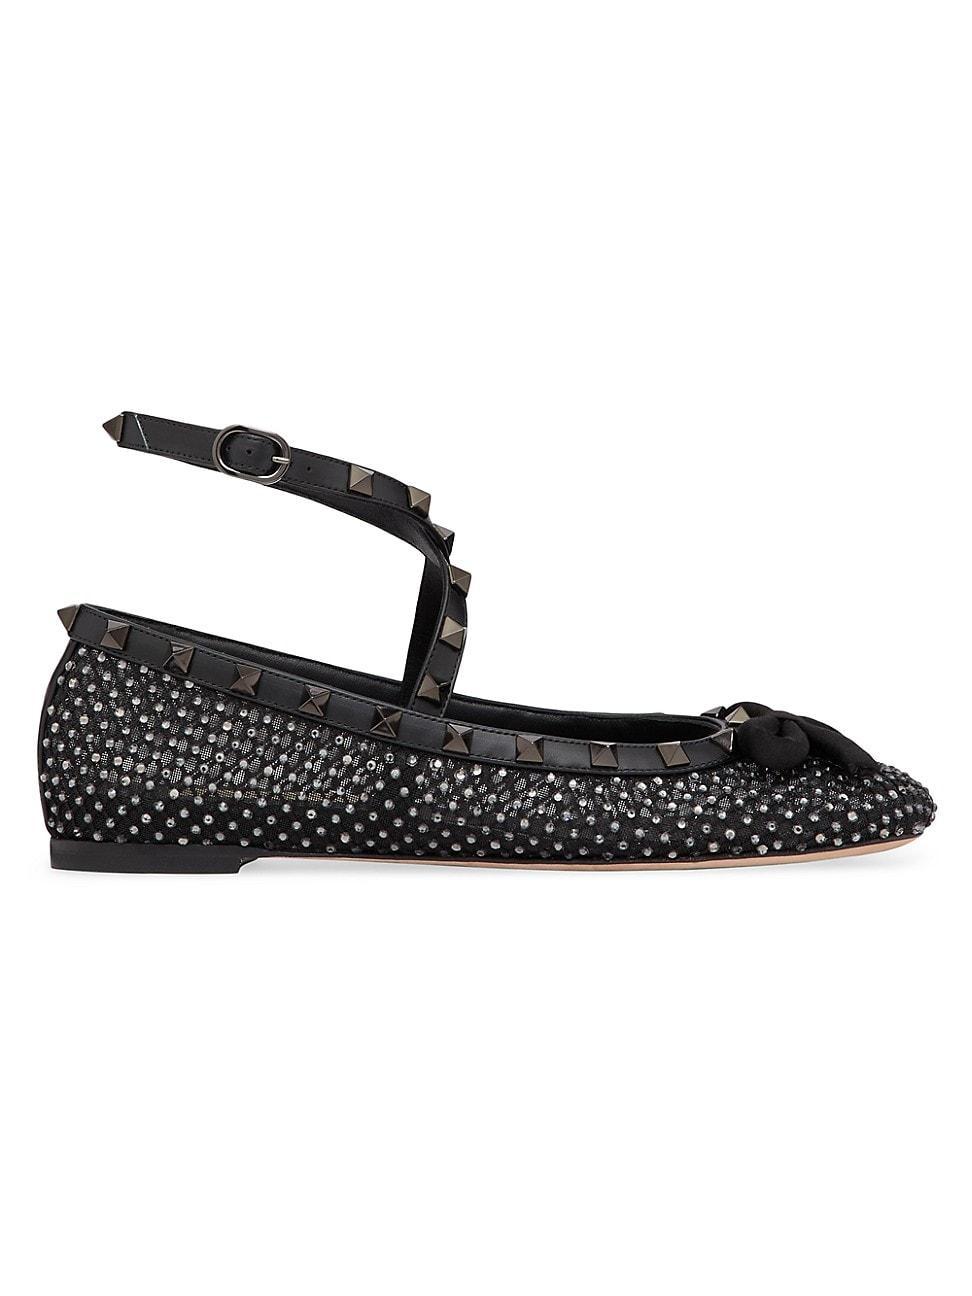 Womens Rockstud Mesh Ballerina Flats With Crystals And Matching Studs Product Image